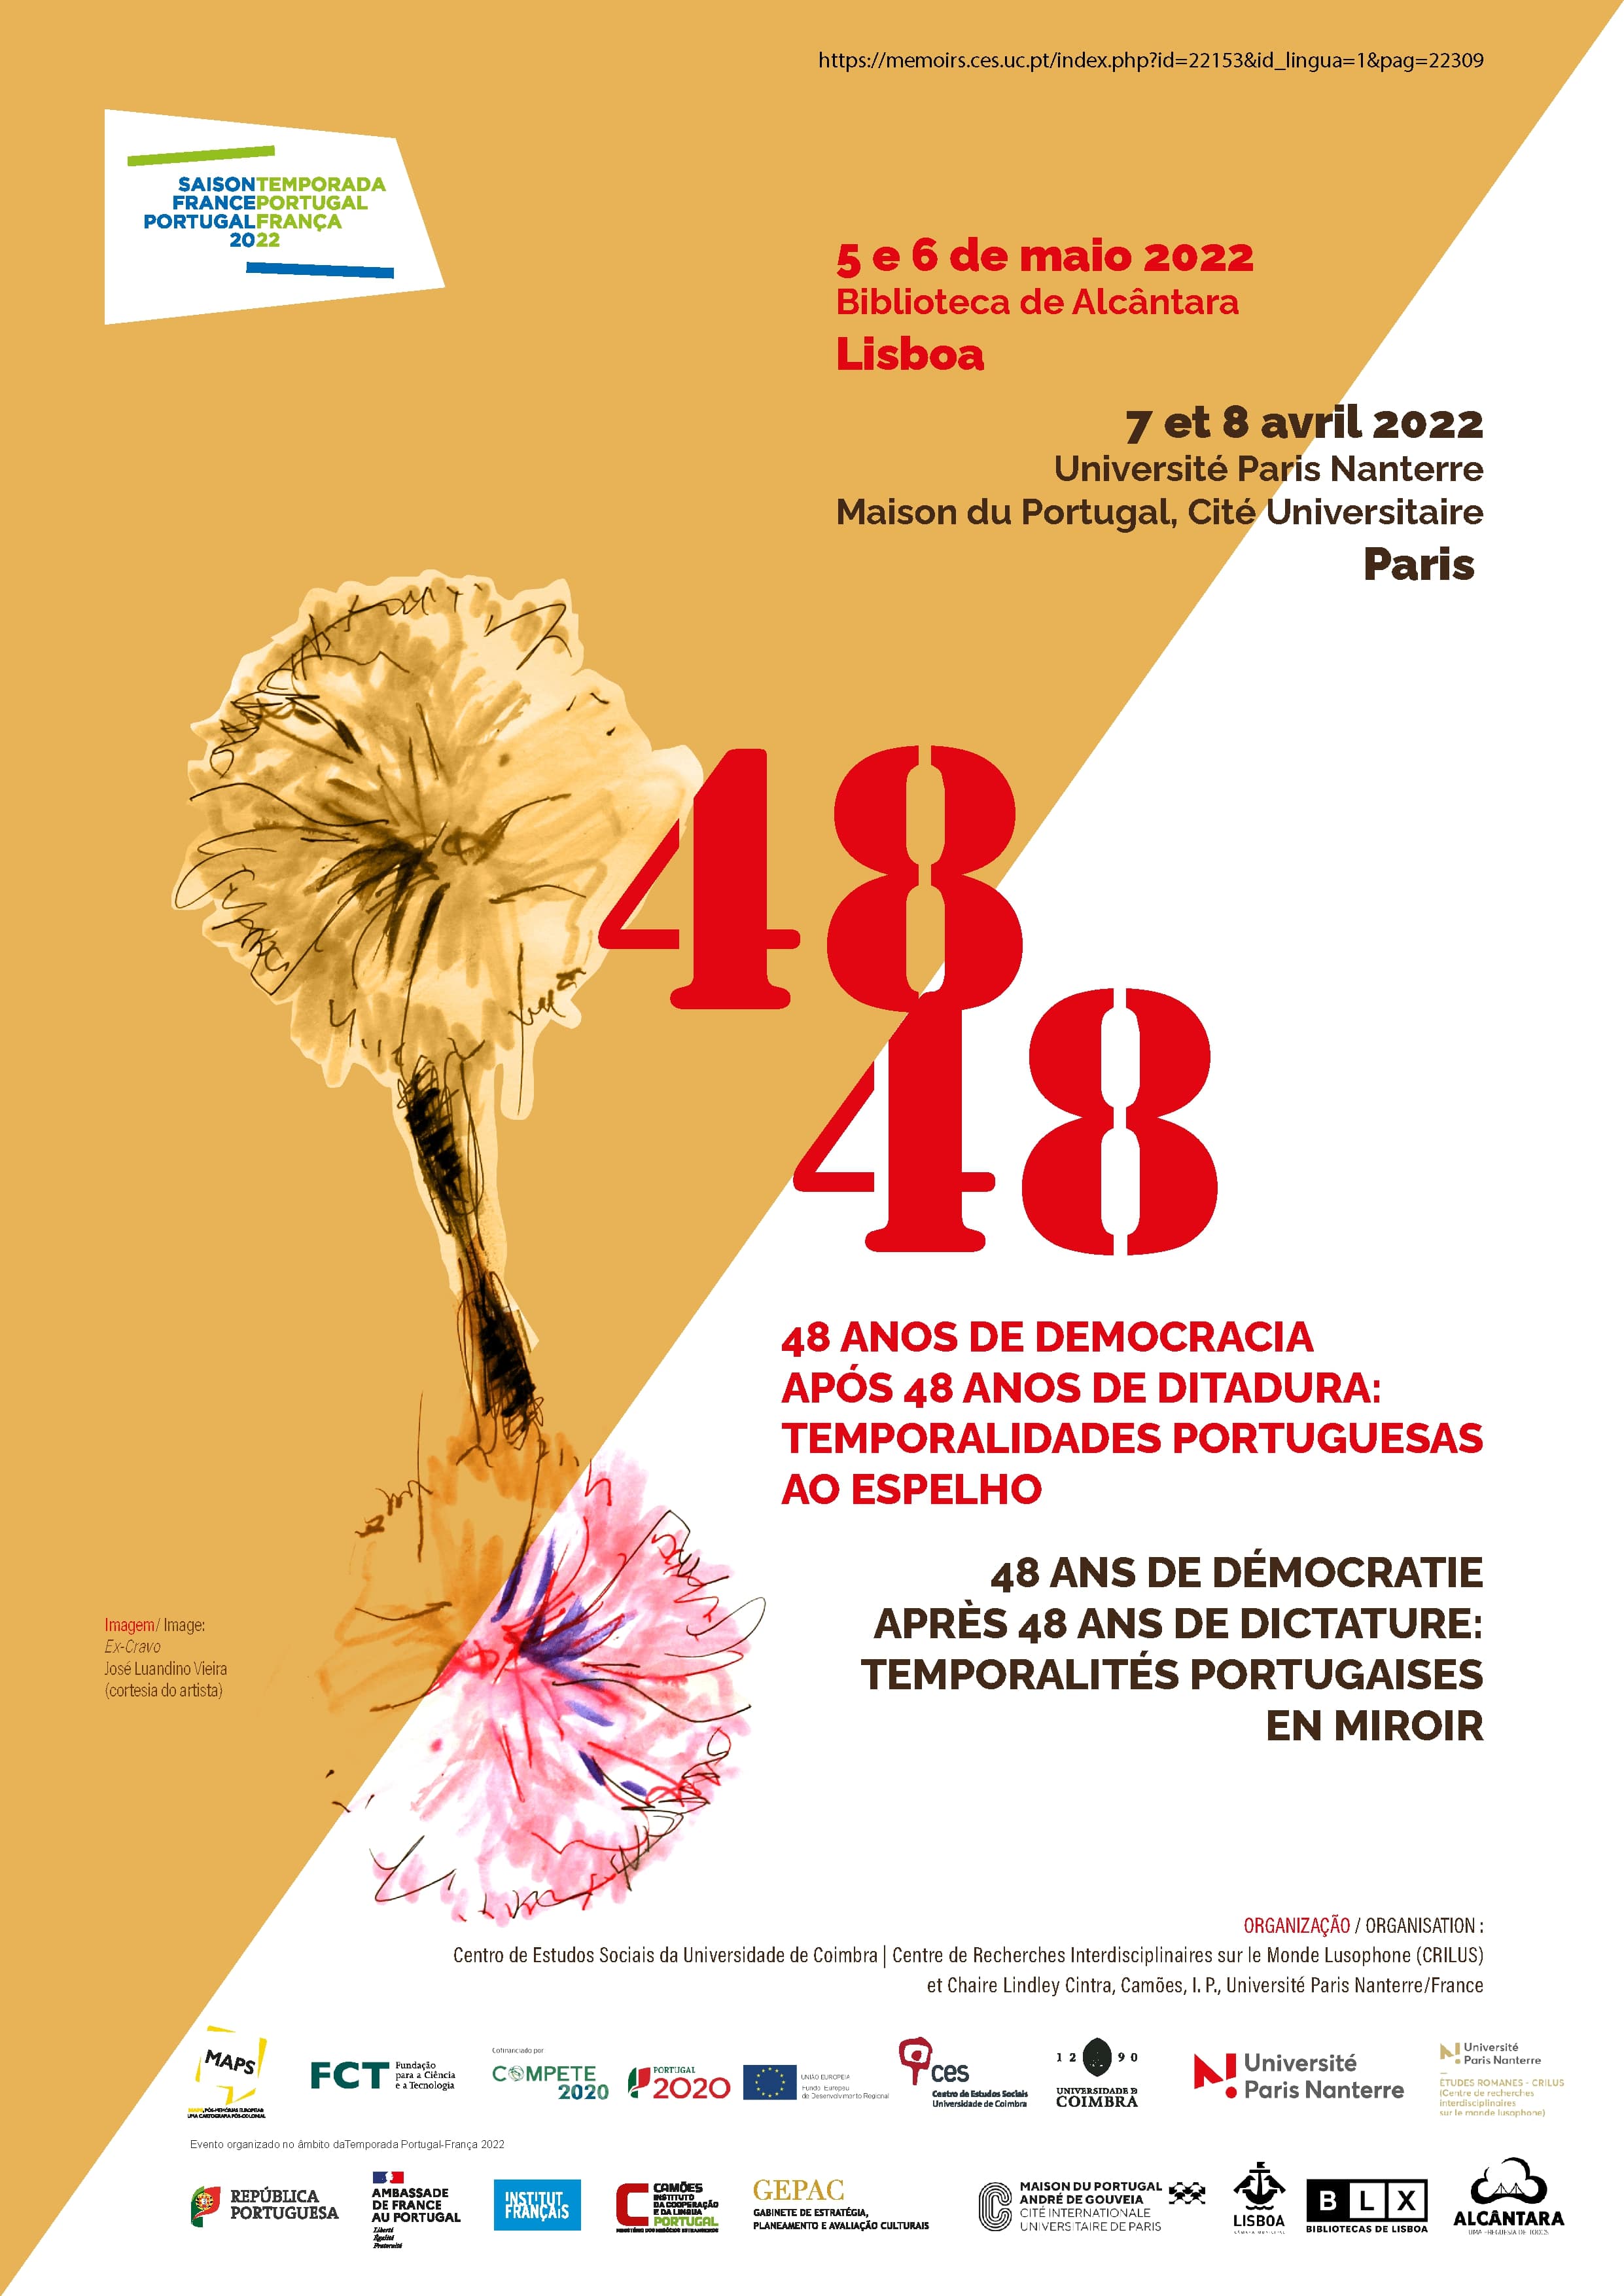 48 X 48, a contemporary European past | Portuguese Temporalities in the mirror: 48 years of democracy, 48 years of dictatorship<span id="edit_37916"><script>$(function() { $('#edit_37916').load( "/myces/user/editobj.php?tipo=evento&id=37916" ); });</script></span>